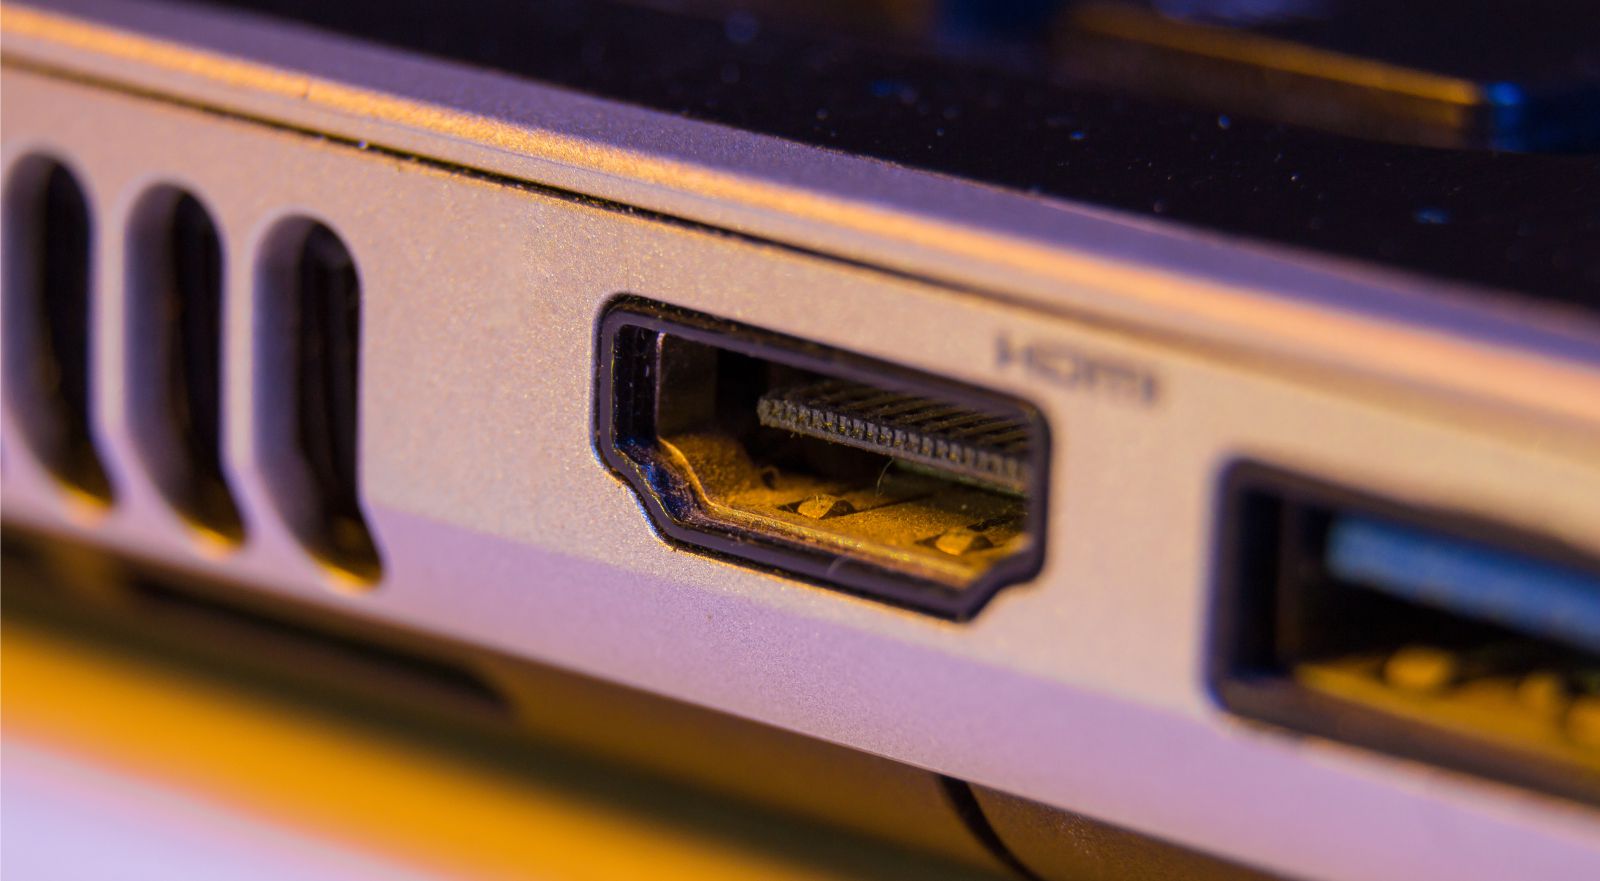 HDMI socket in the laptop